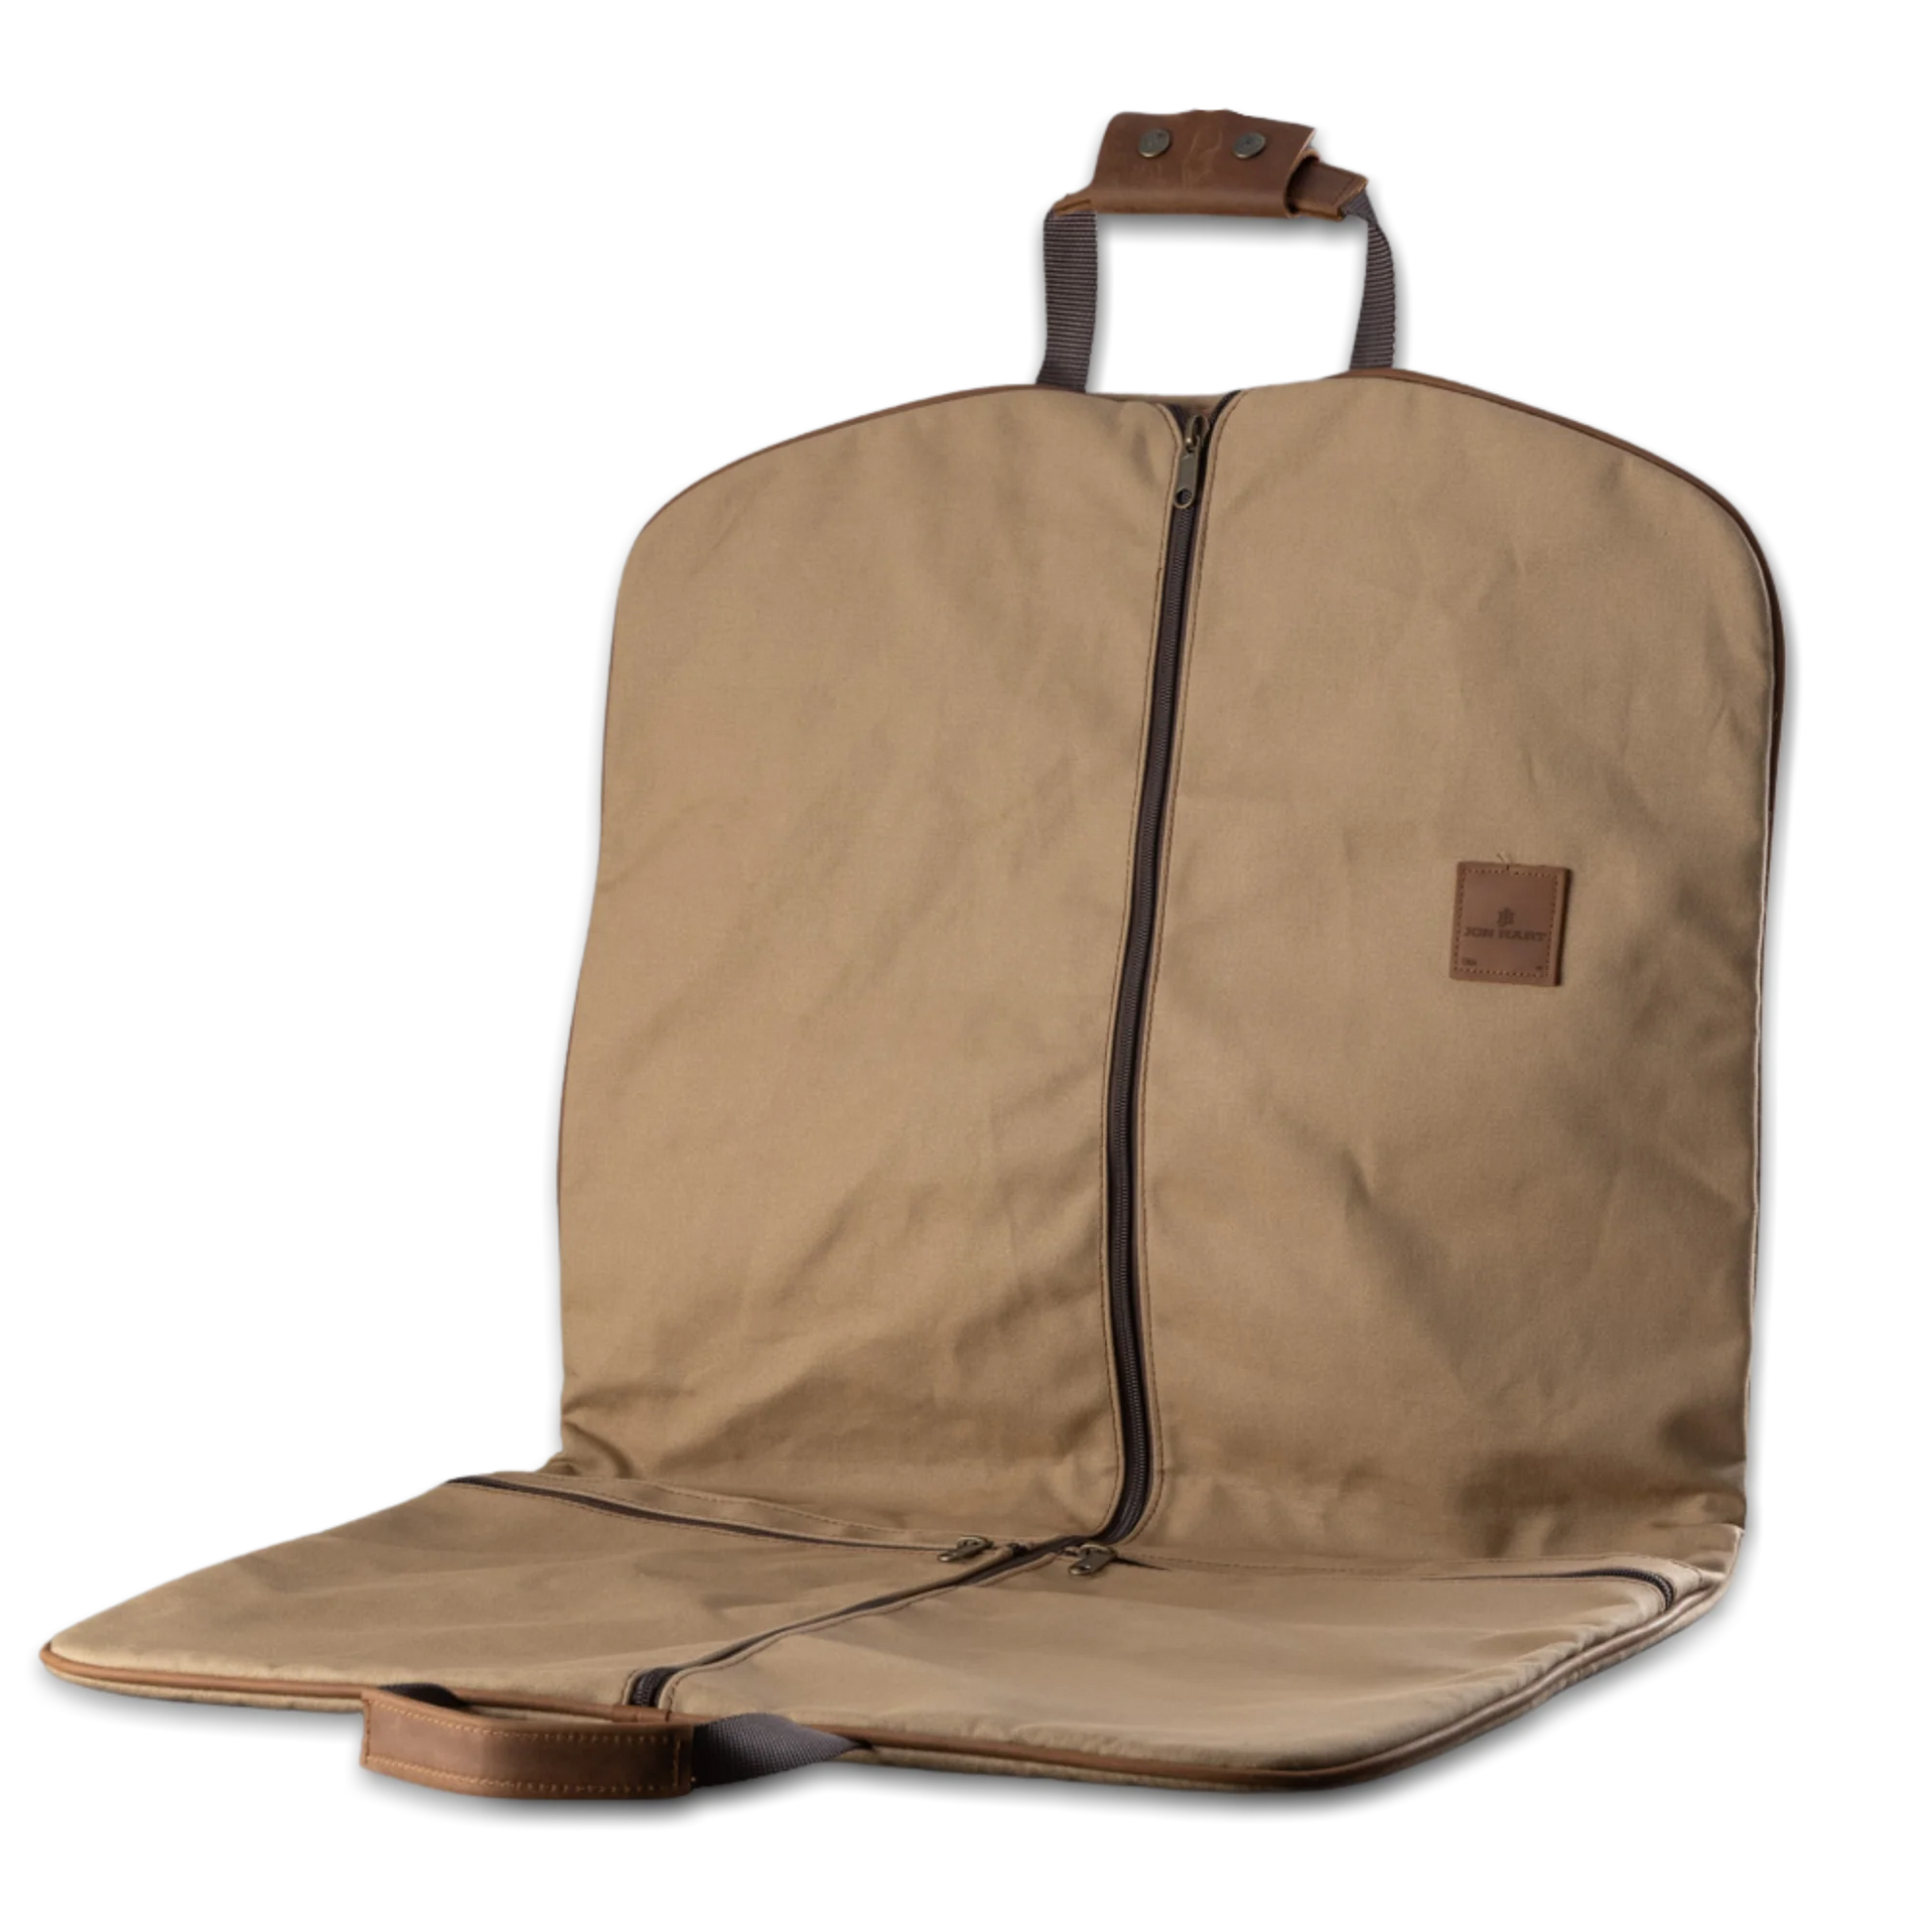 JH Two-Suiter (Order in any color!) Garment Bags Jon Hart   